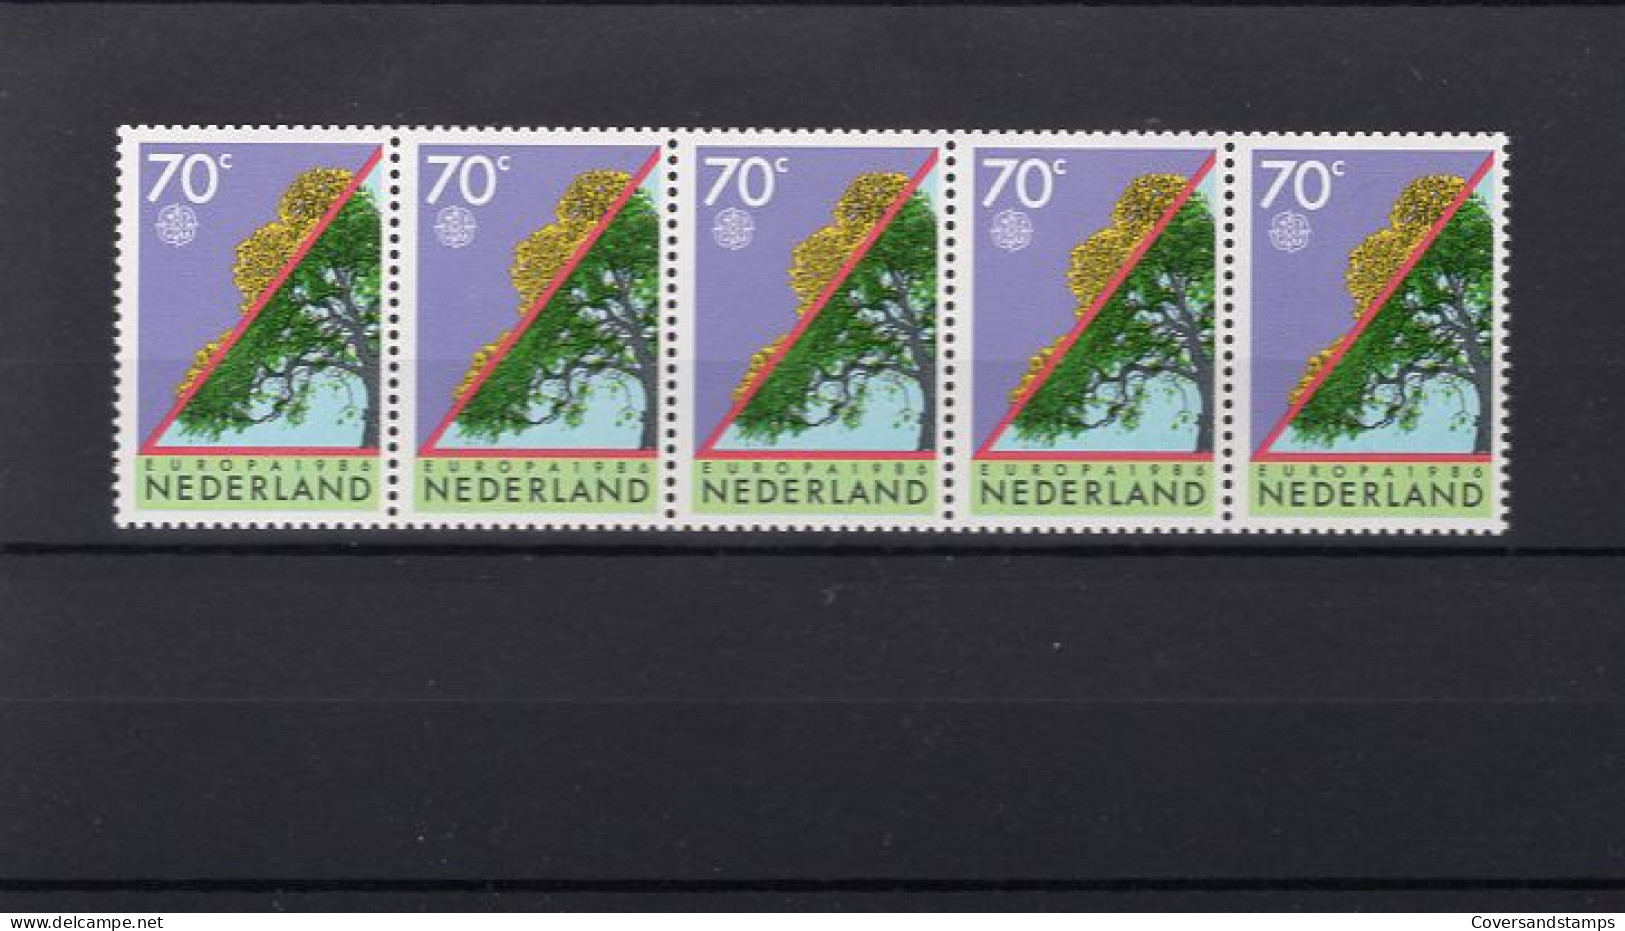  Netherlands - NVPH 1354 In Strips Of 5, Number 00130  ** MNH - 1986